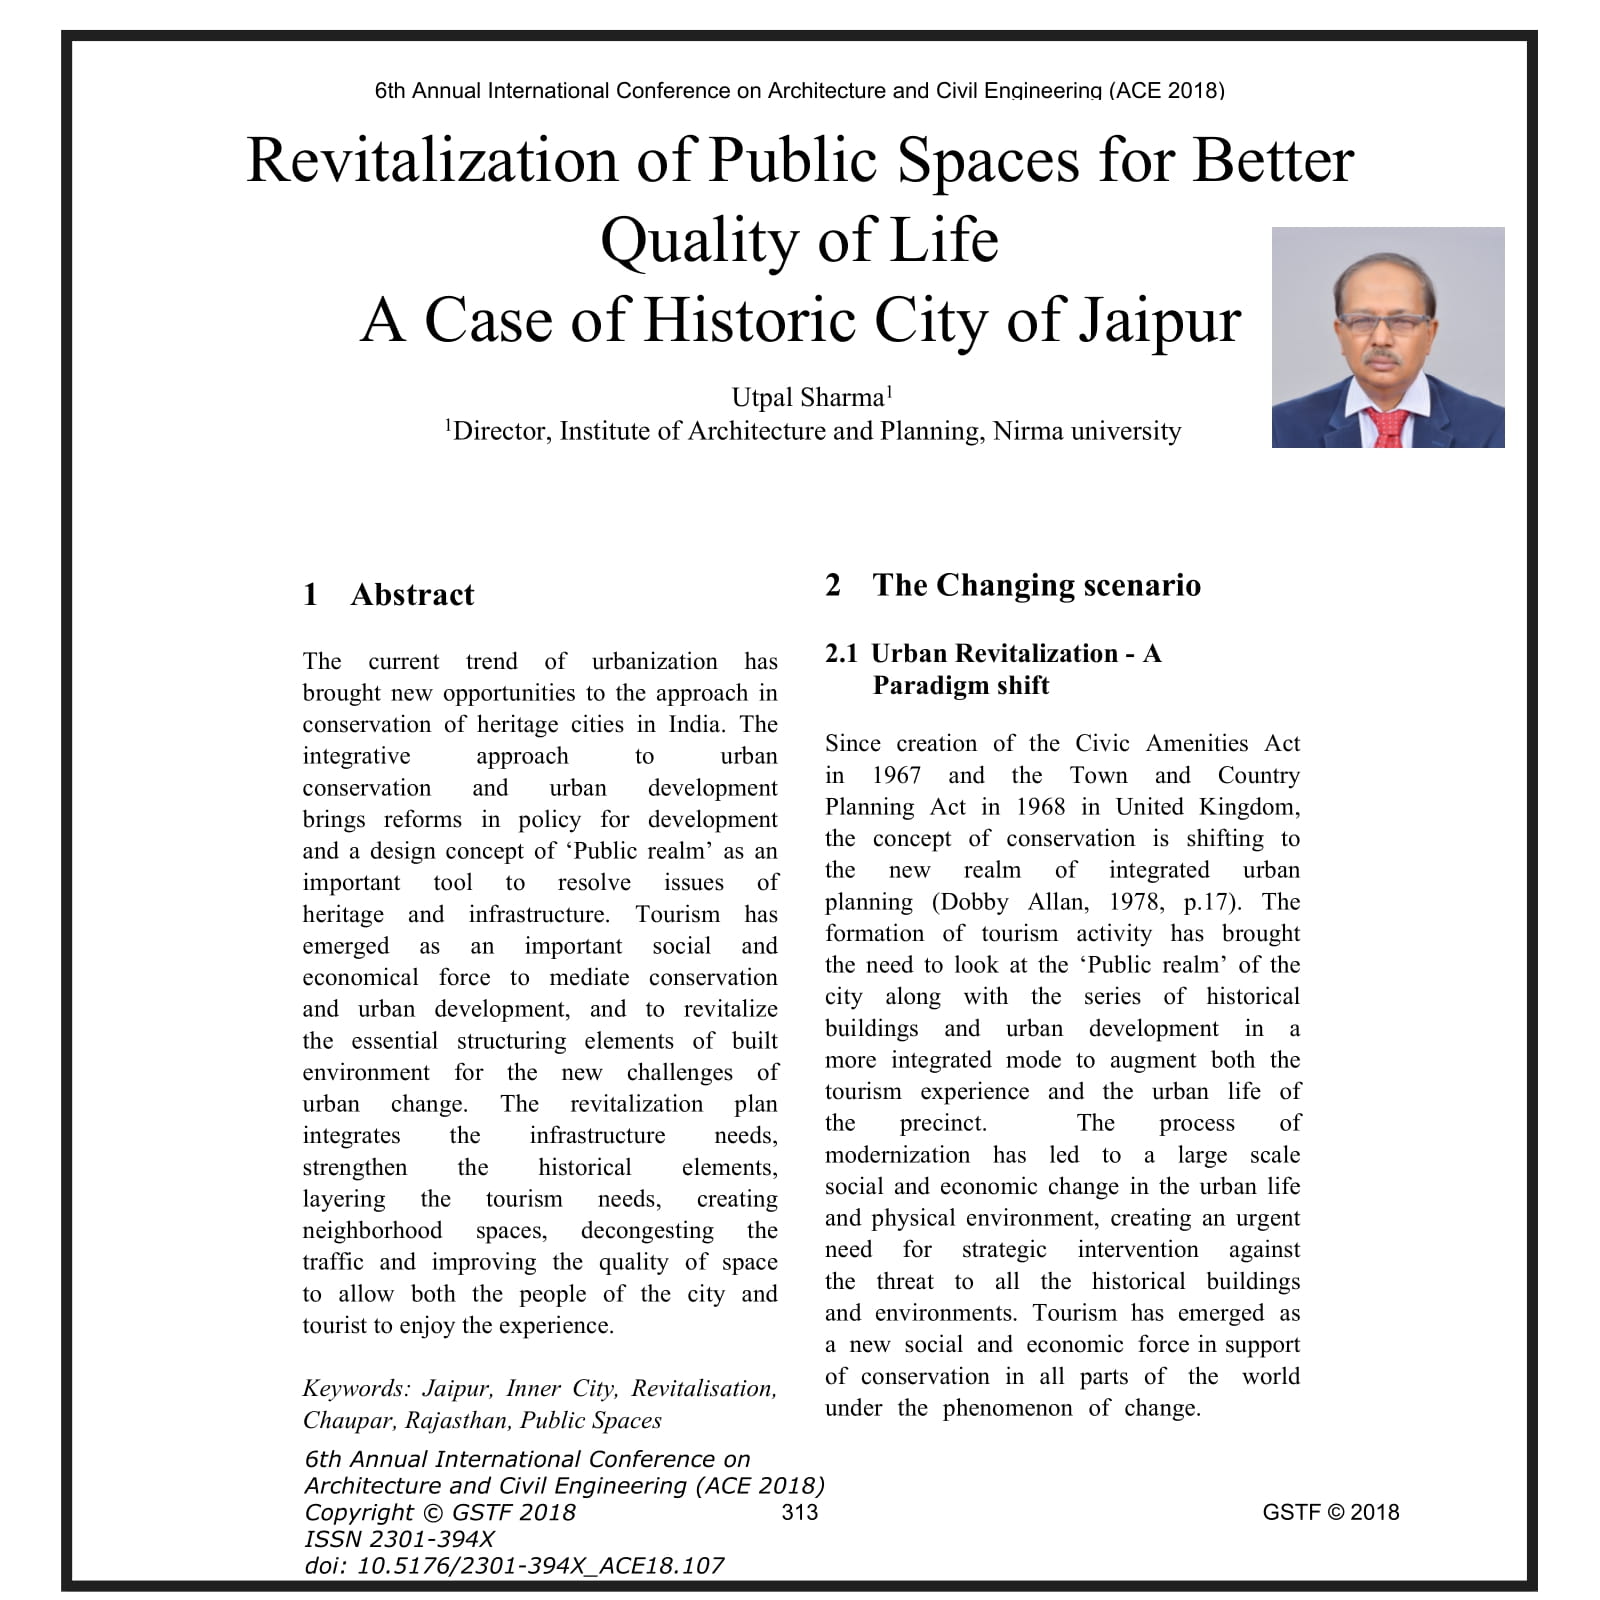 Revitalization of Public Spaces for Better Quality of Life A Case of Historic City of Jaipur